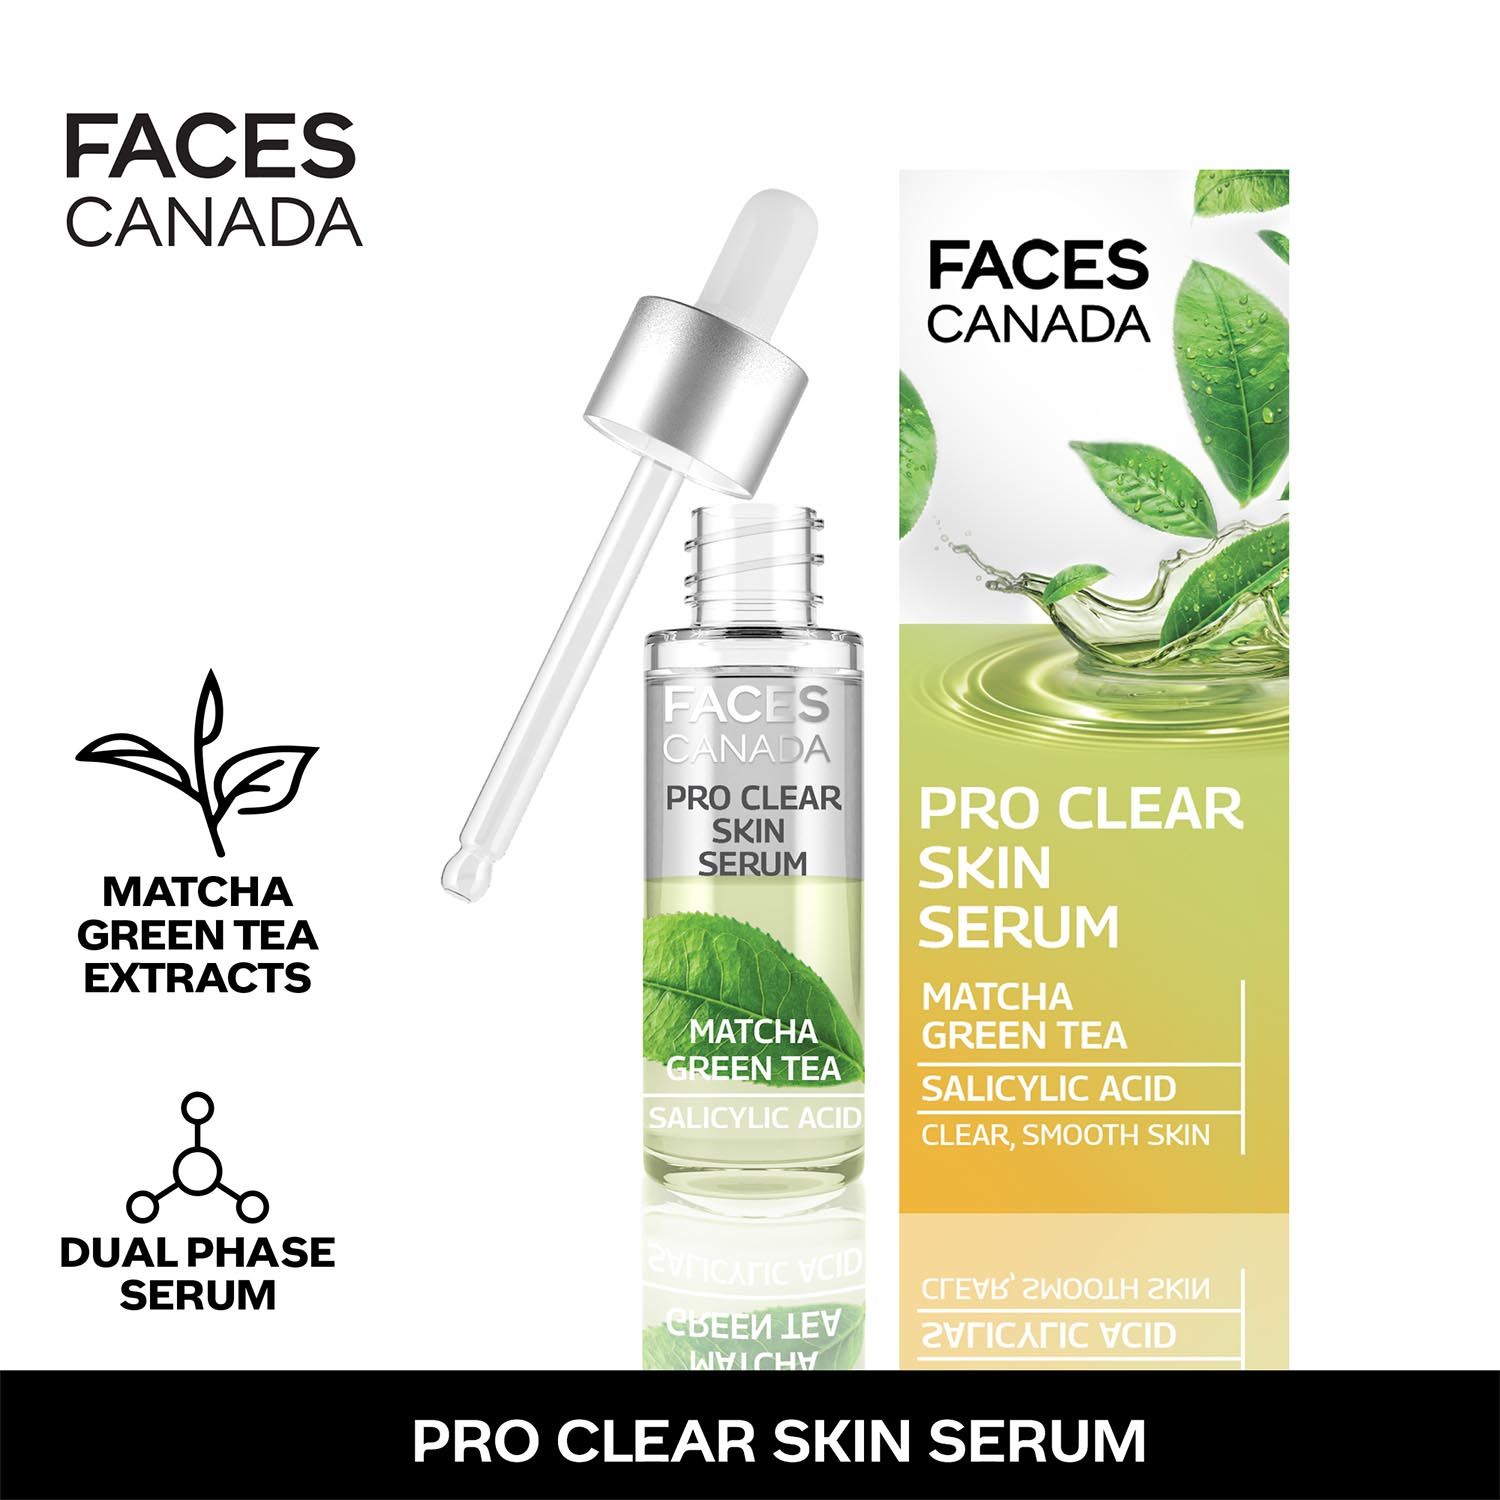 Buy FACES CANADA Pro Clear Skin Serum, 27 ml | Matcha Green Tea & Salicylic Acid | Biphasic Face Serum | Nourishes & Soothes For Clear, Radiant & Acne-Free Skin | Helps Reduce Redness & Unclogs Pores - Purplle